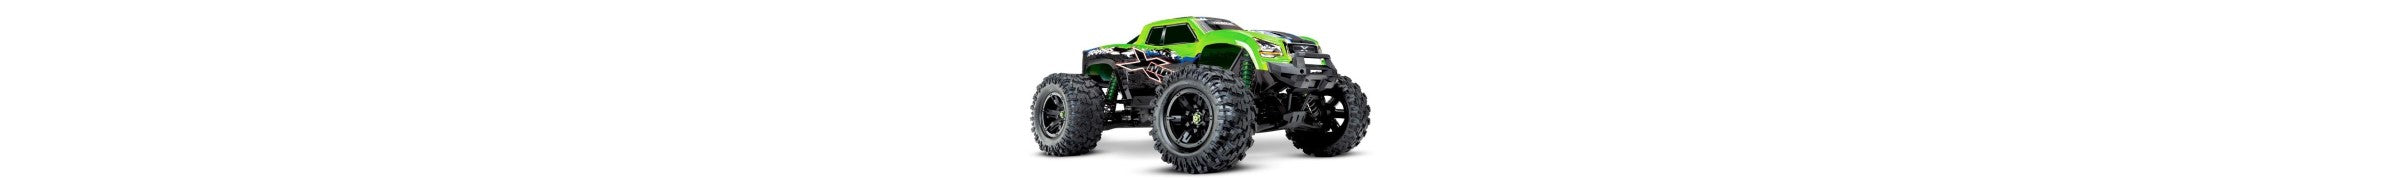 Parts for 77086-4 Traxxas X-Maxx 8S 1/5 Brushless Electric Monster Truck